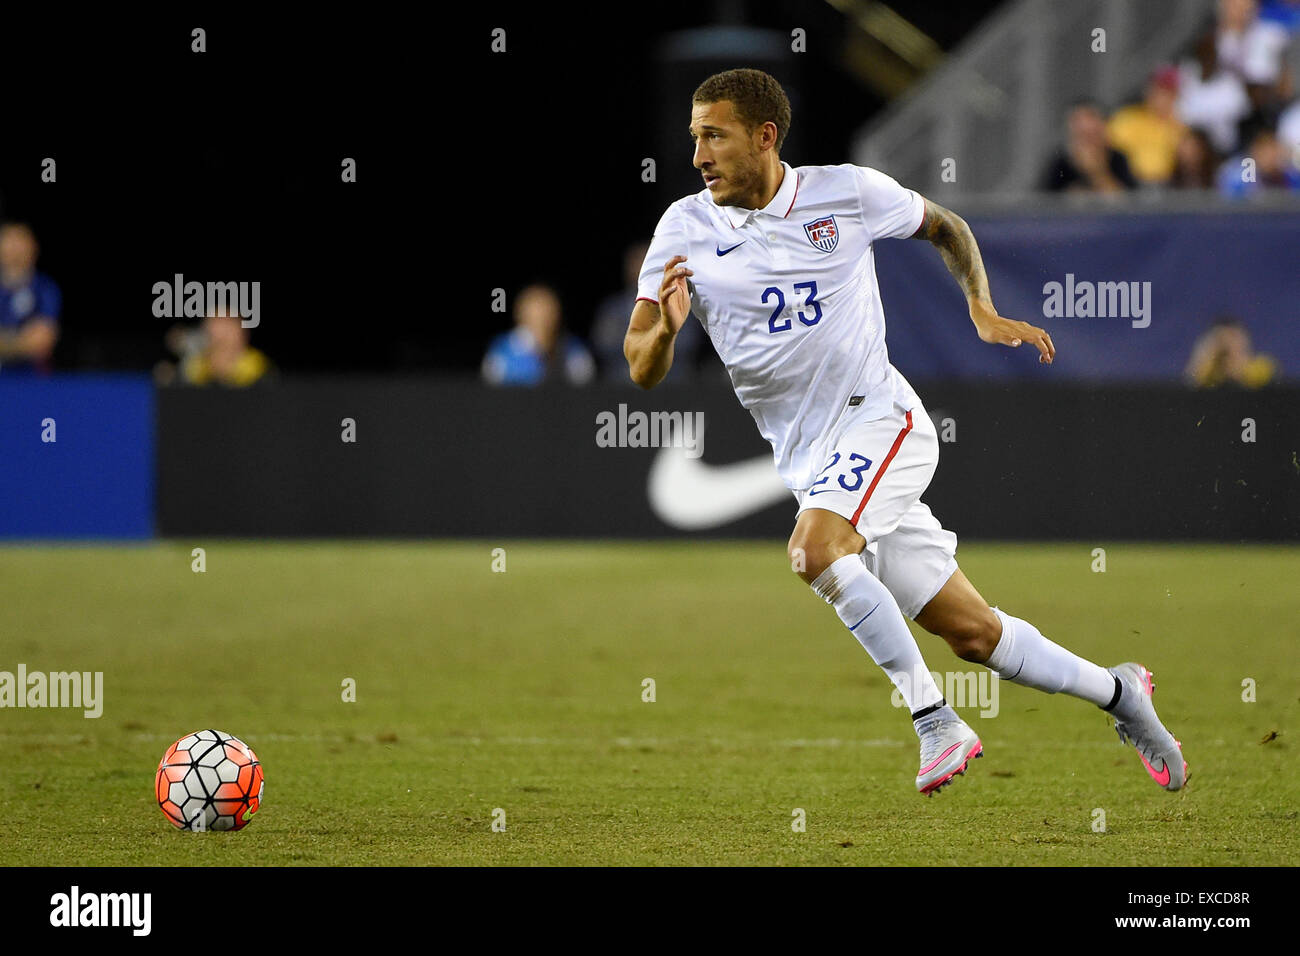 Foxborough, Massachusetts, USA. 10th July, 2015. United States defender Fabian Johnson (23) in game action during the CONCACAF Gold Cup group stage match between USA and Haiti held at Gillette Stadium, in Foxborough Massachusetts. USA defeated Haiti 1-0. Eric Canha/CSM/Alamy Live News Stock Photo